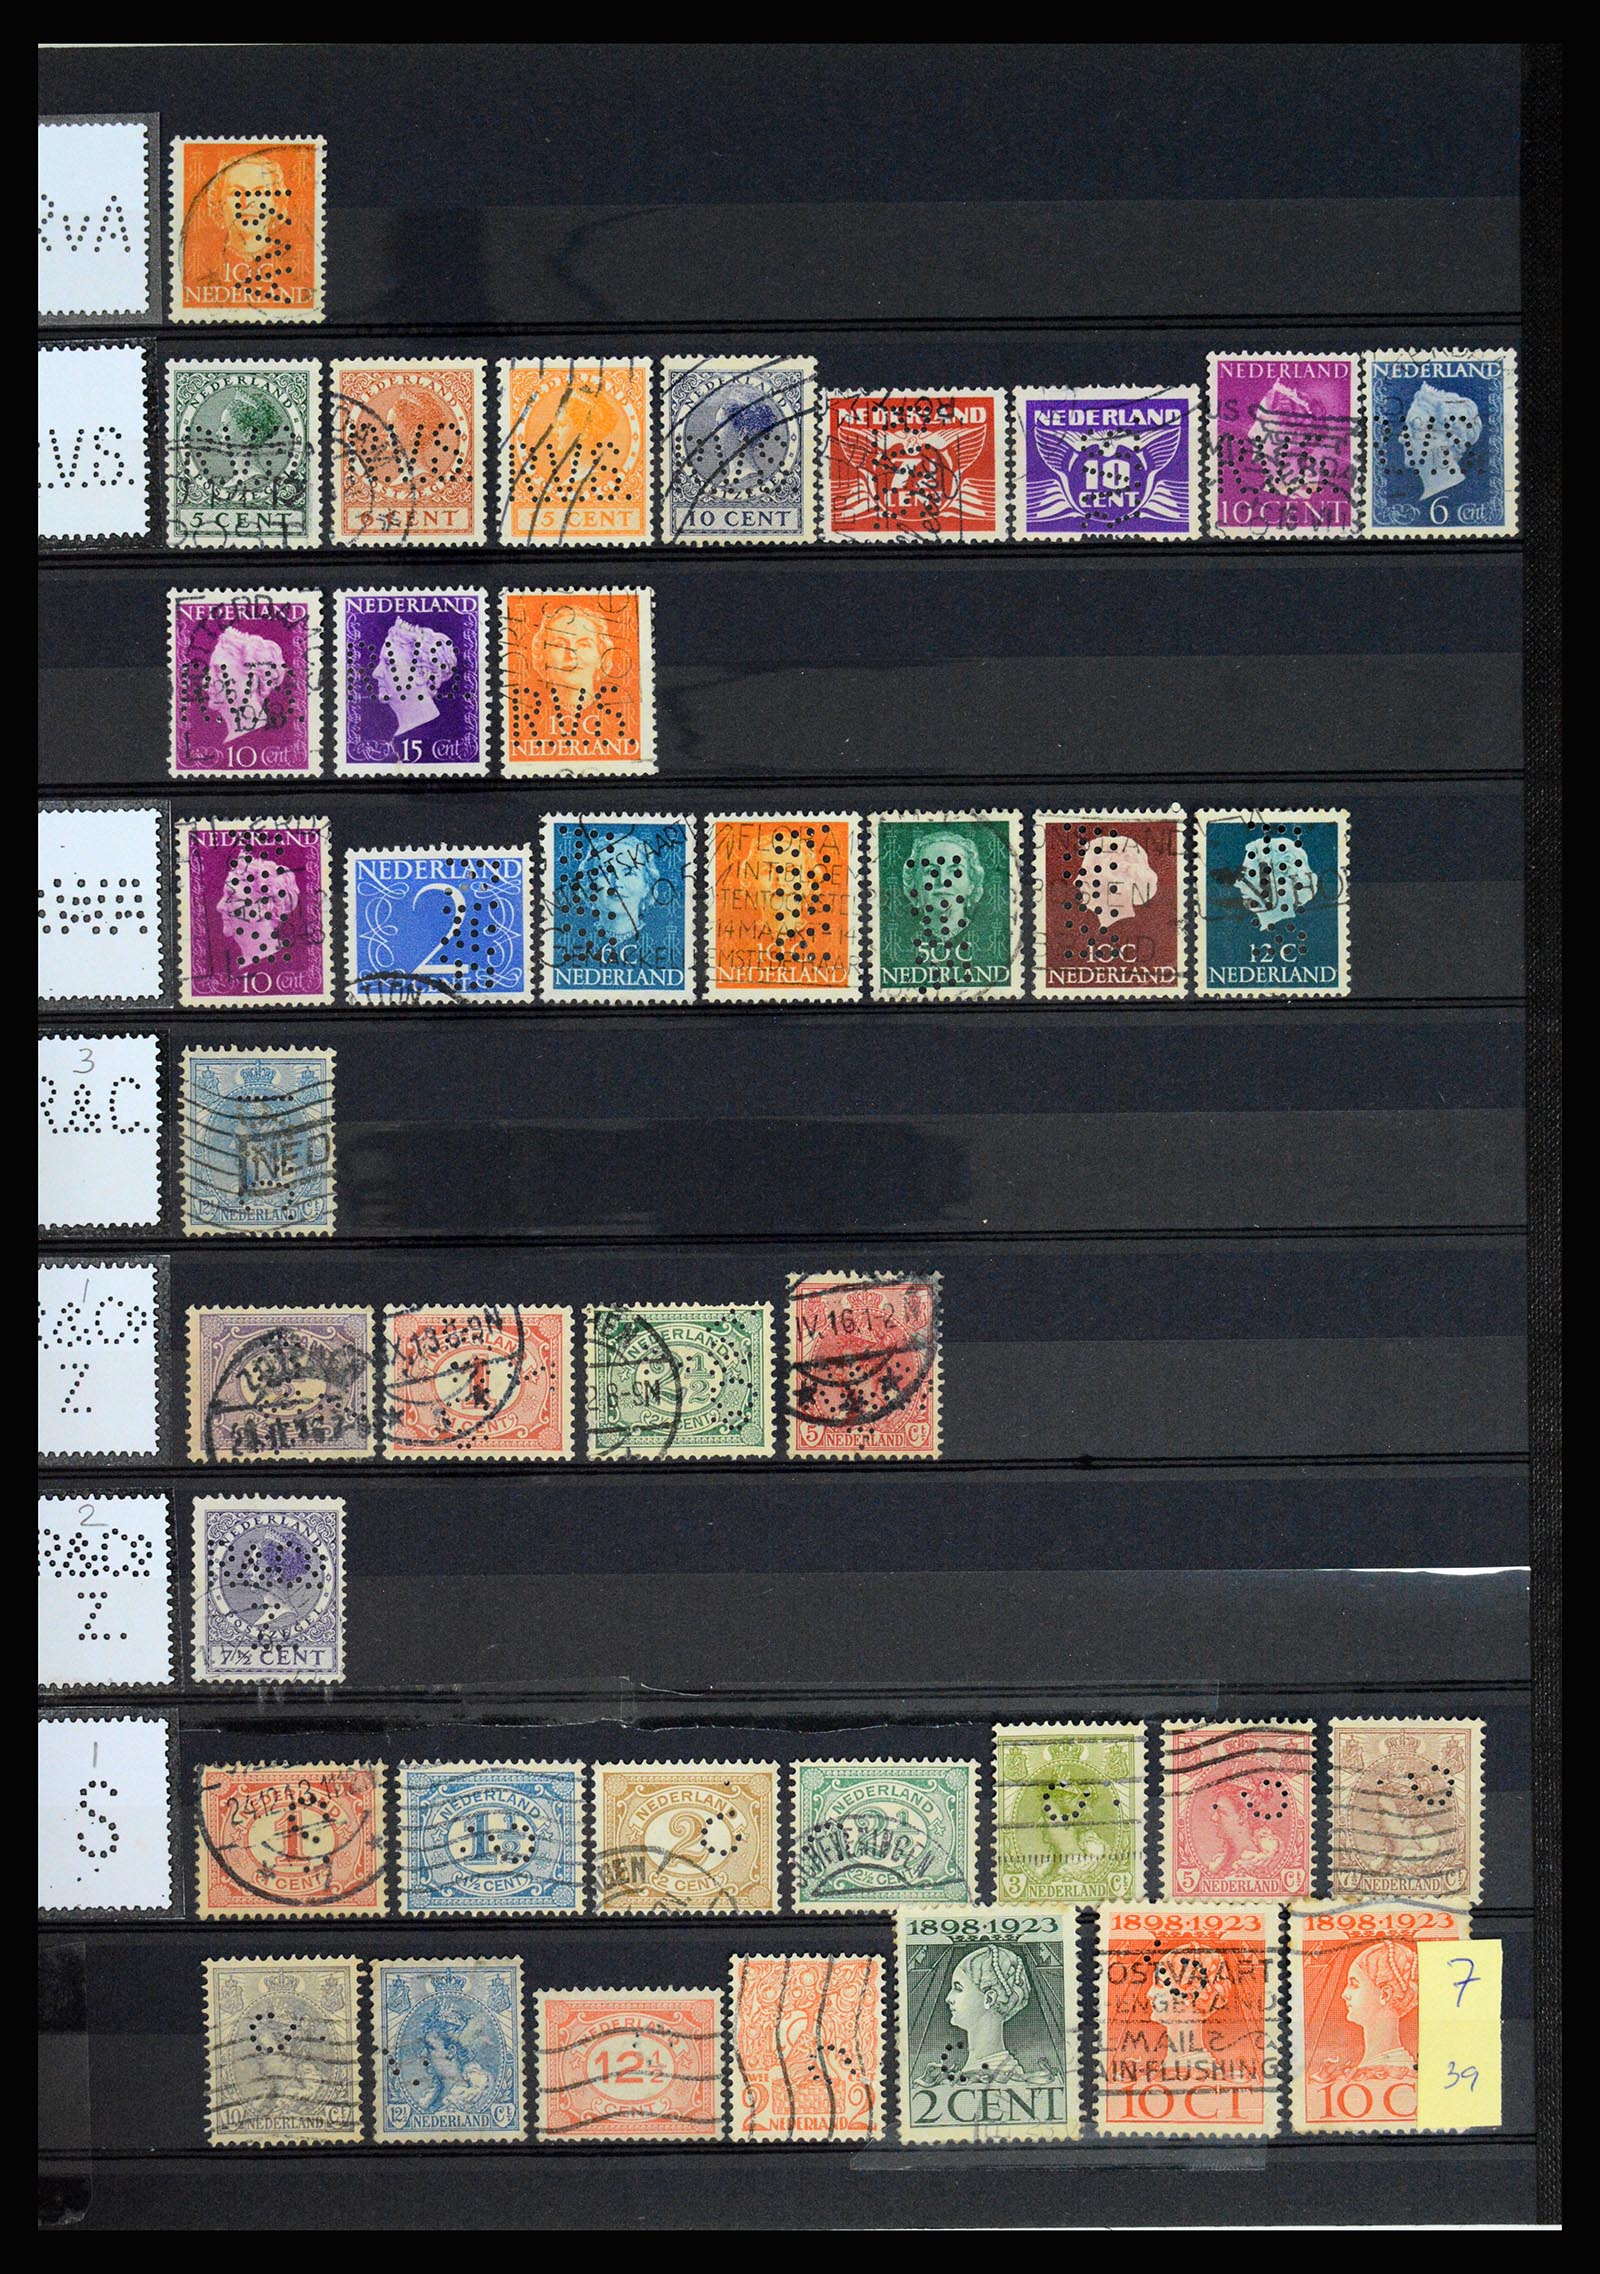 37183 043 - Stamp collection 37183 Netherlands perfins 1872-1960.